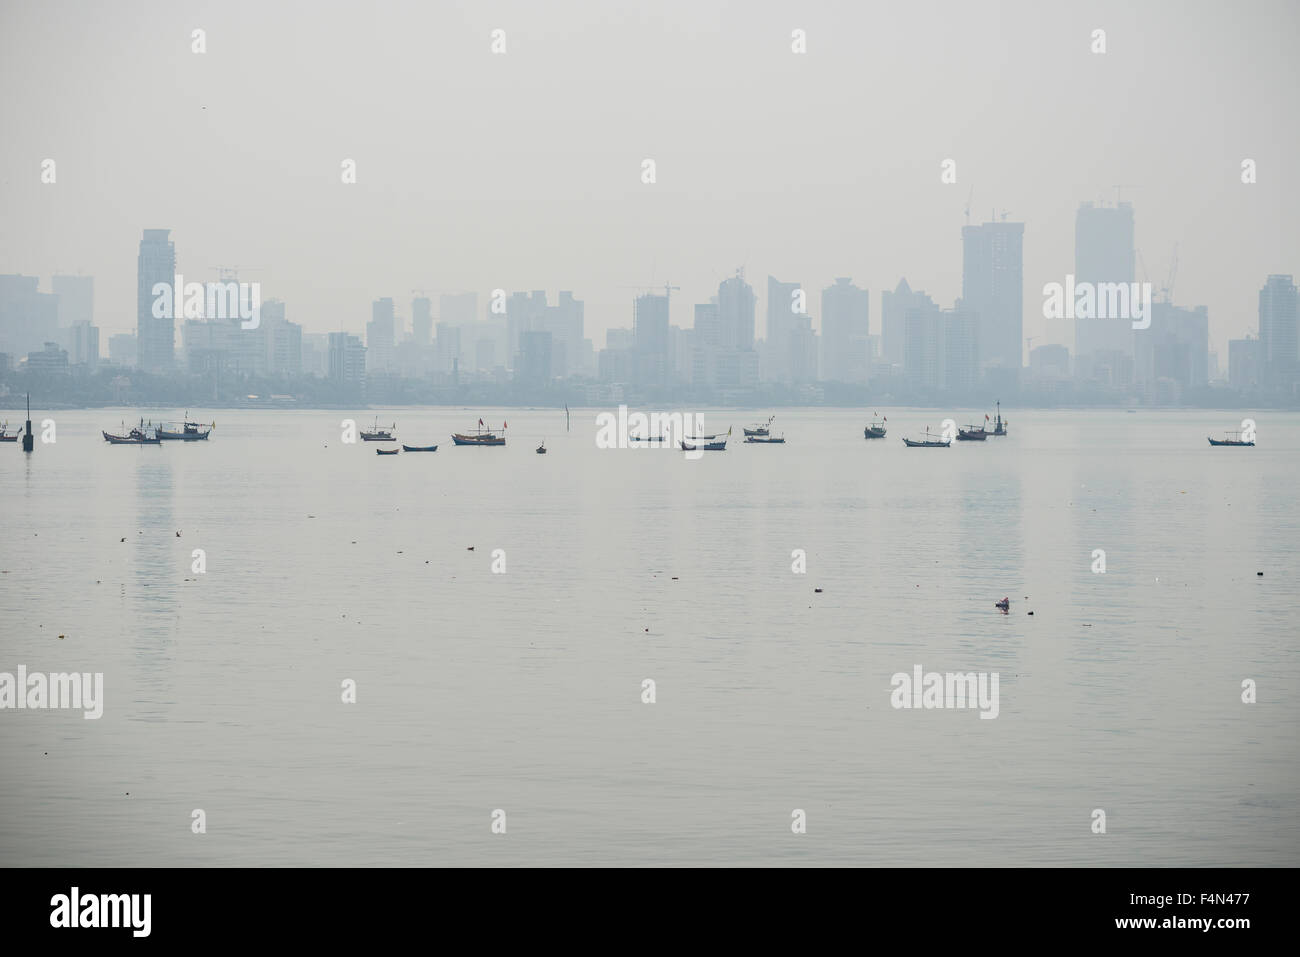 The skyline of the suburb Worli seen across the Mahim Bay with some fishing boats in the morning haze Stock Photo